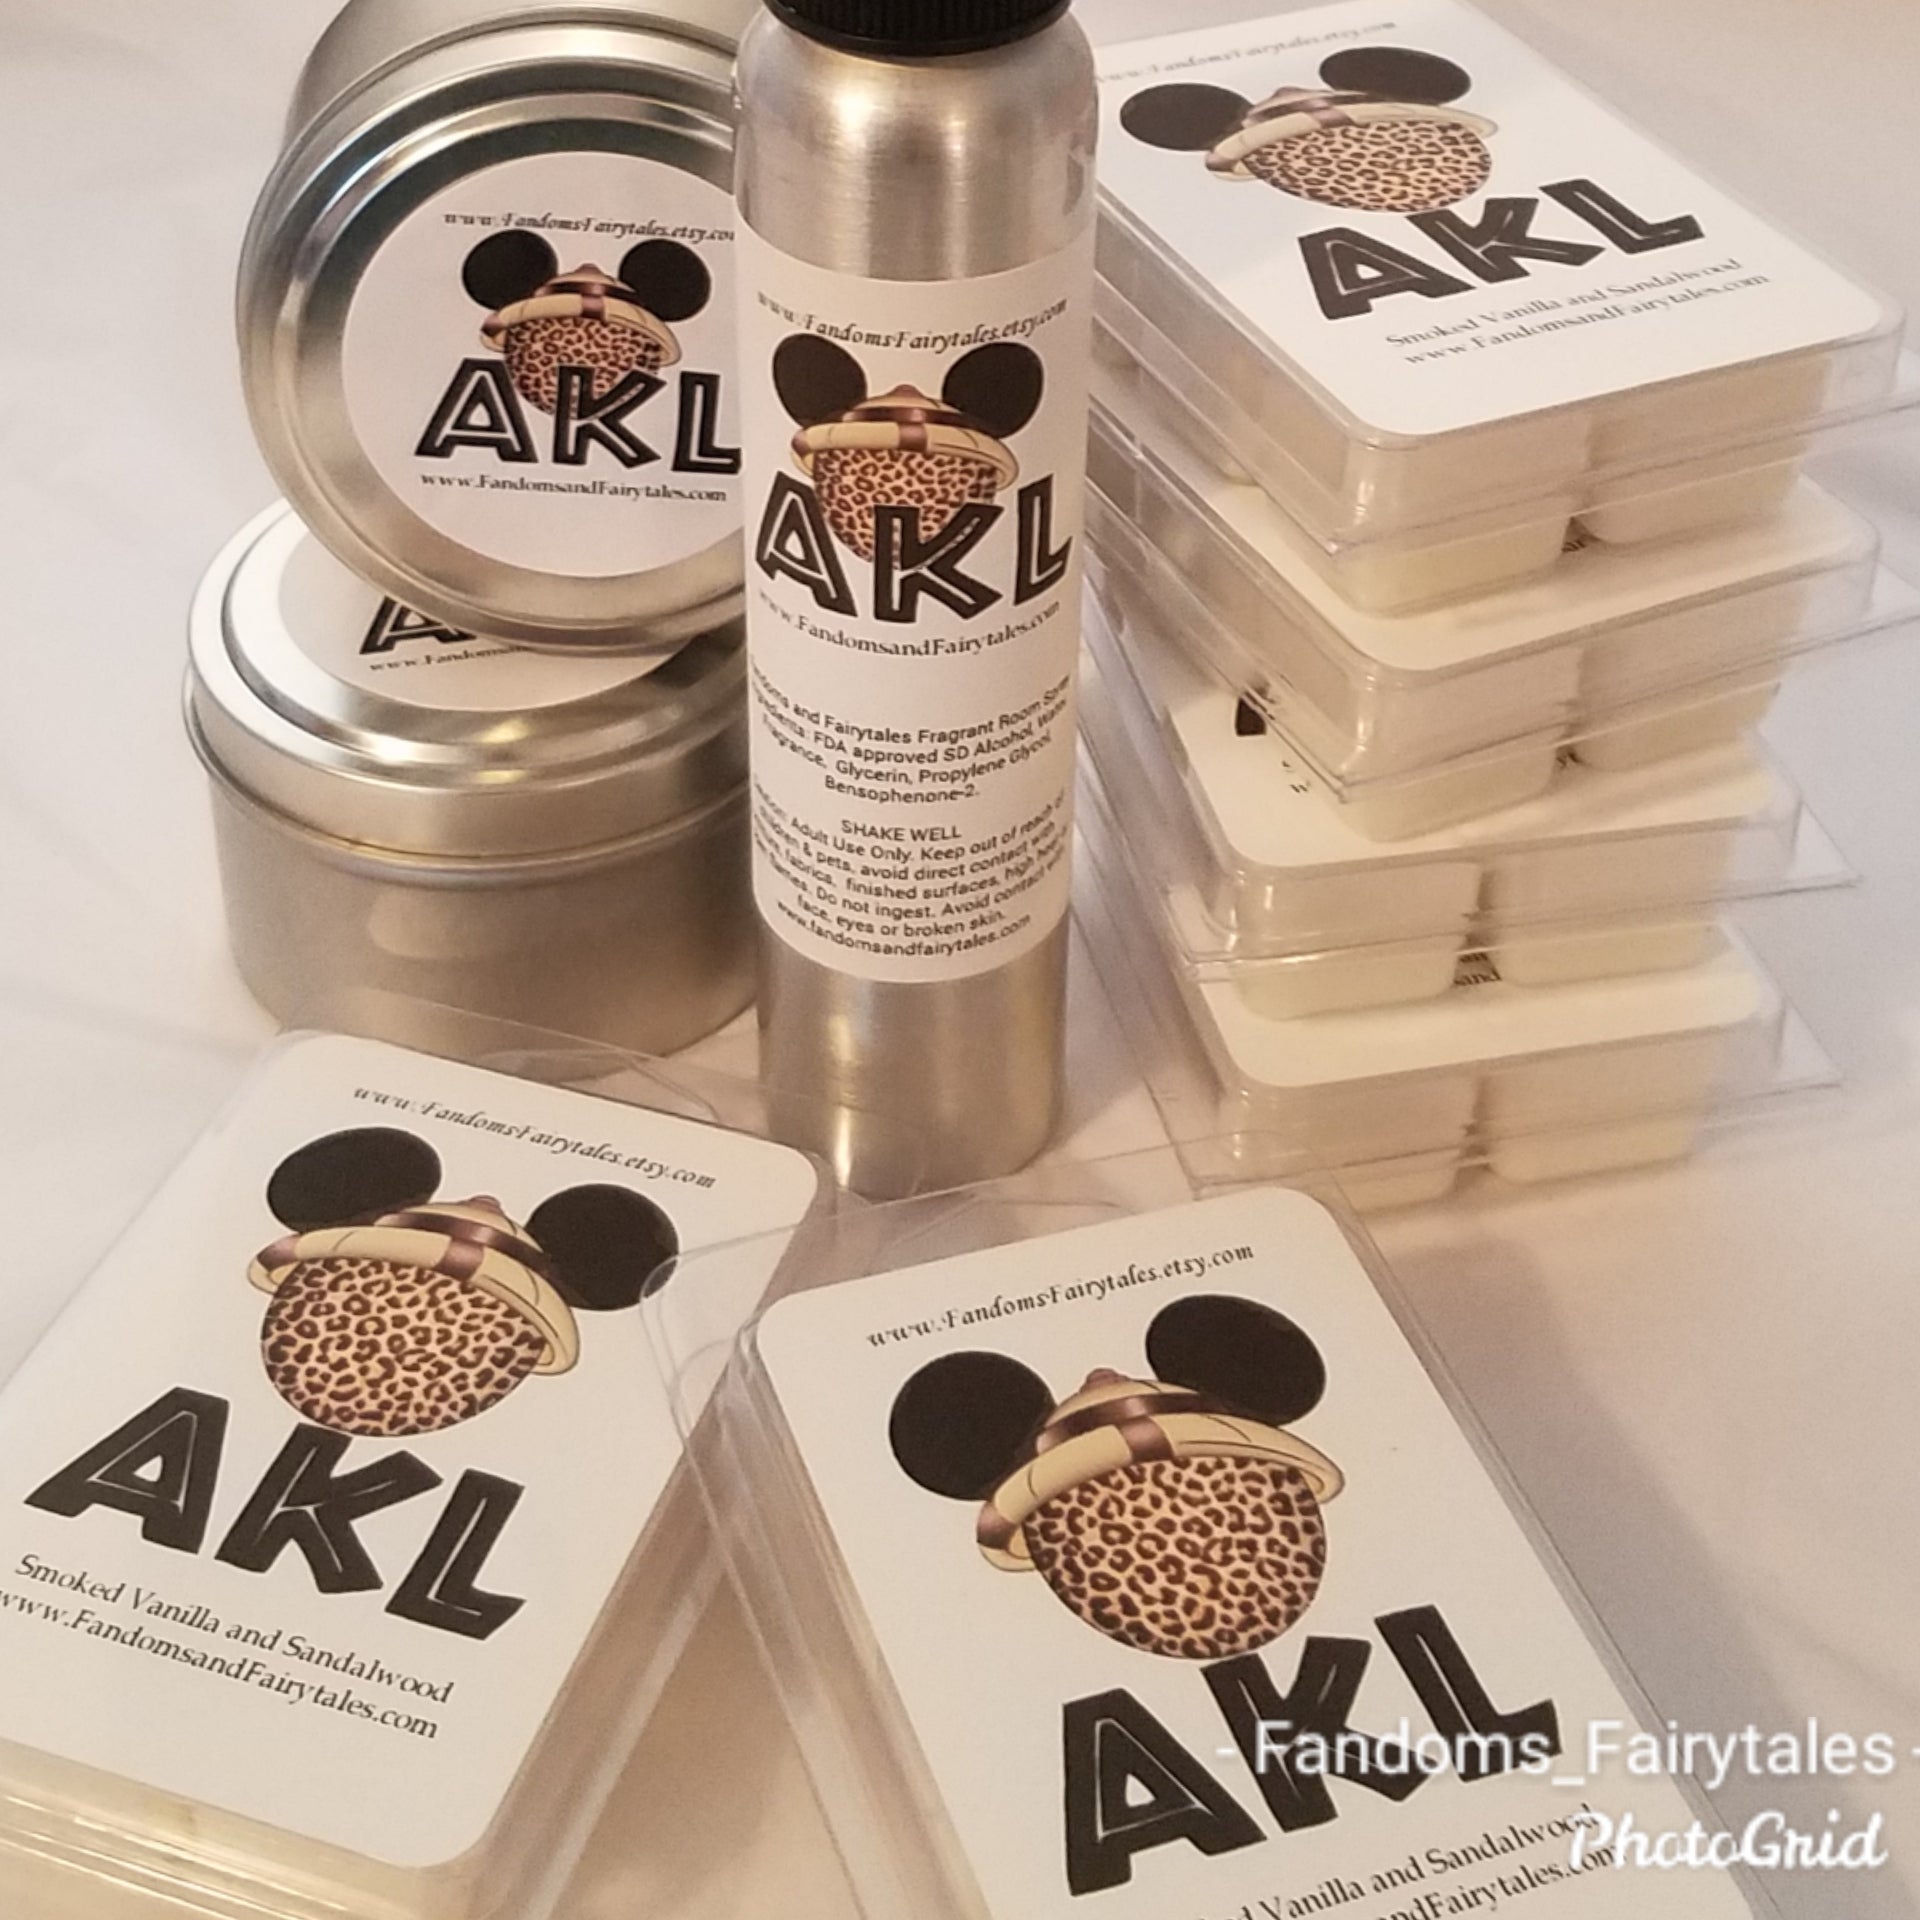 AKL Lobby Scent candles, wax melts or room spray